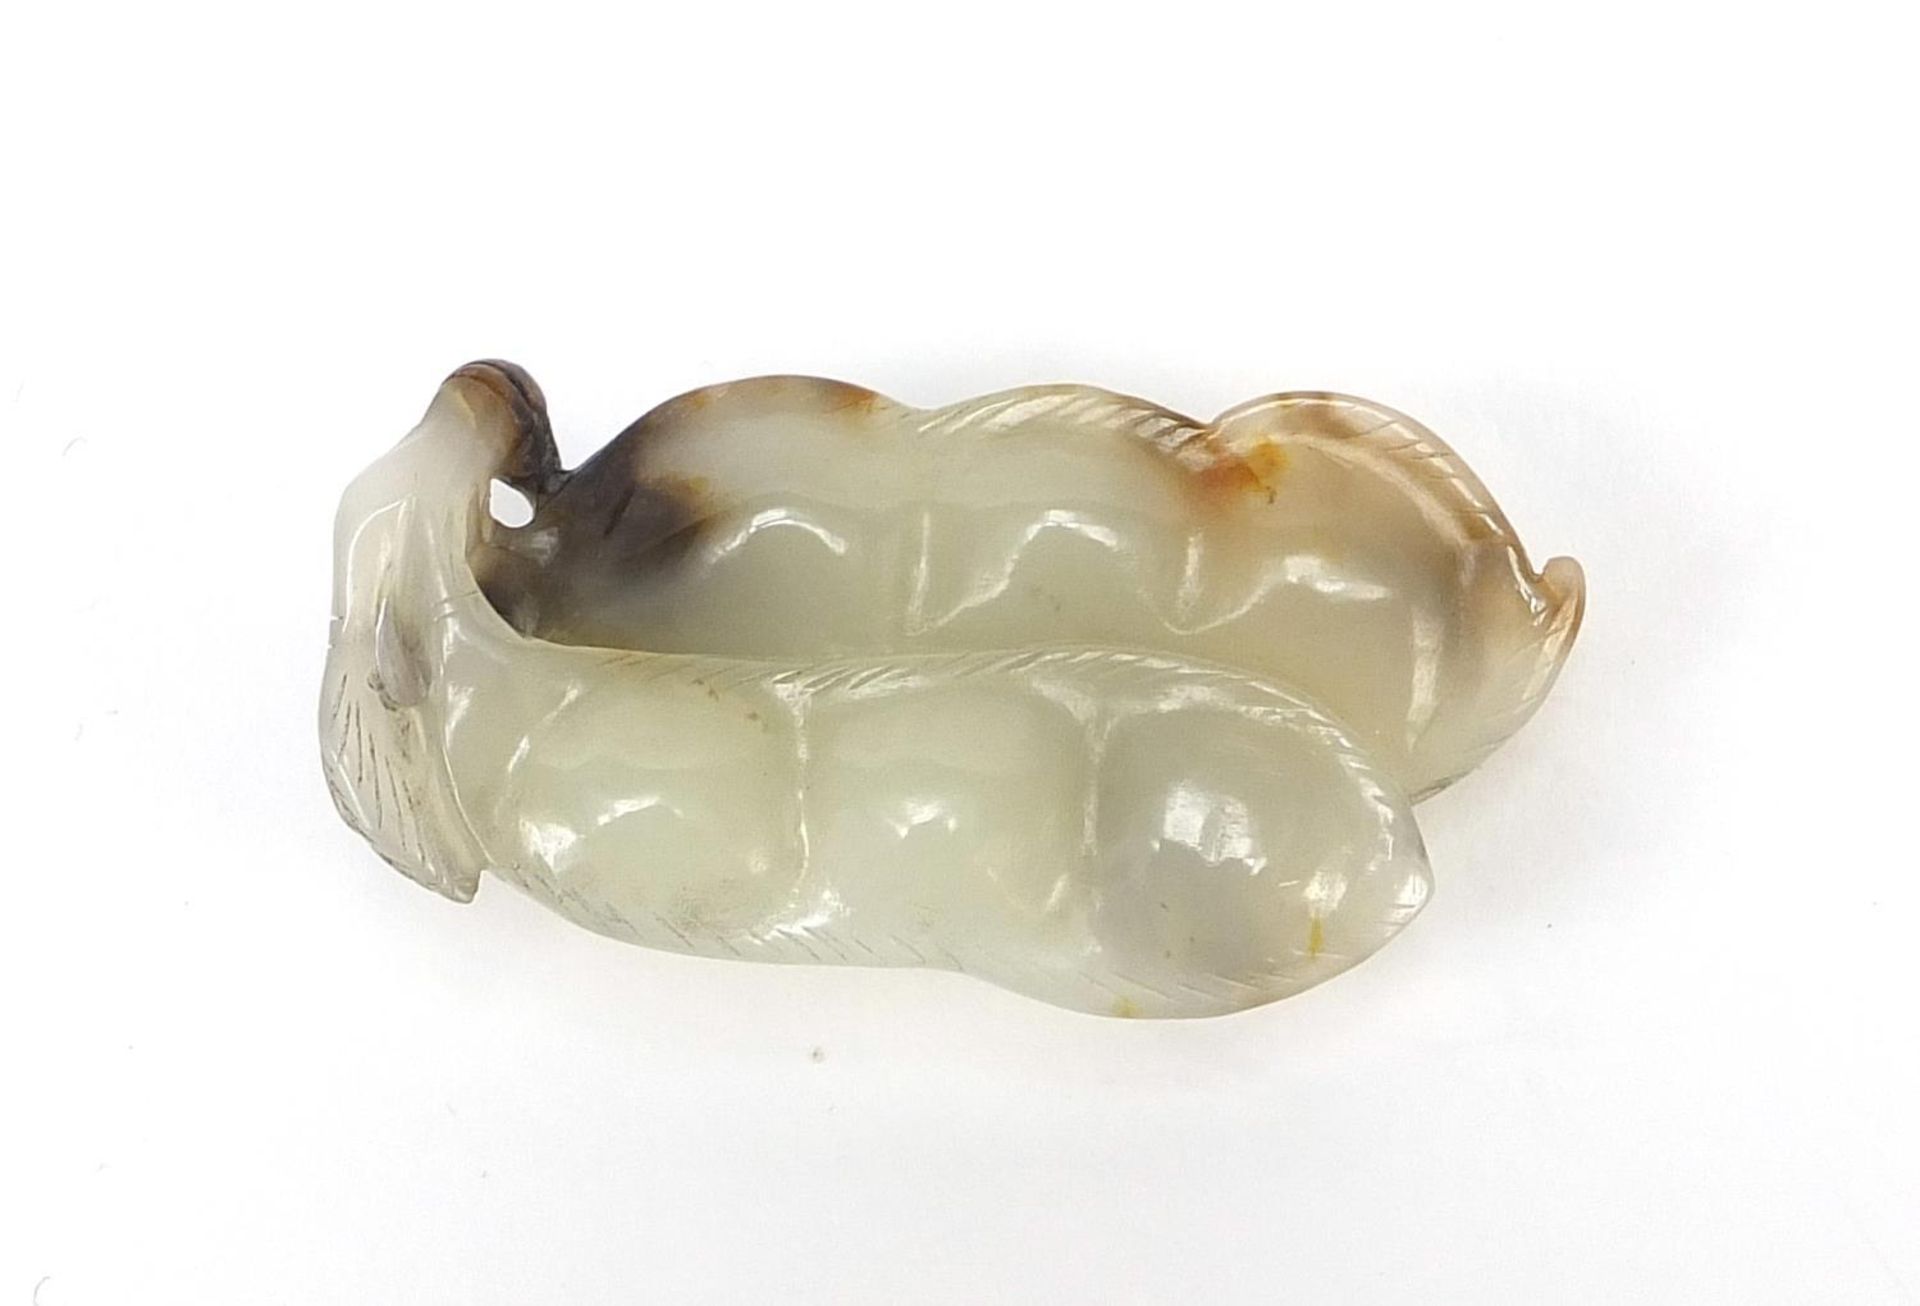 Good Chinese white and russet jade carving of two beans, 5.5cm in length - Image 7 of 7